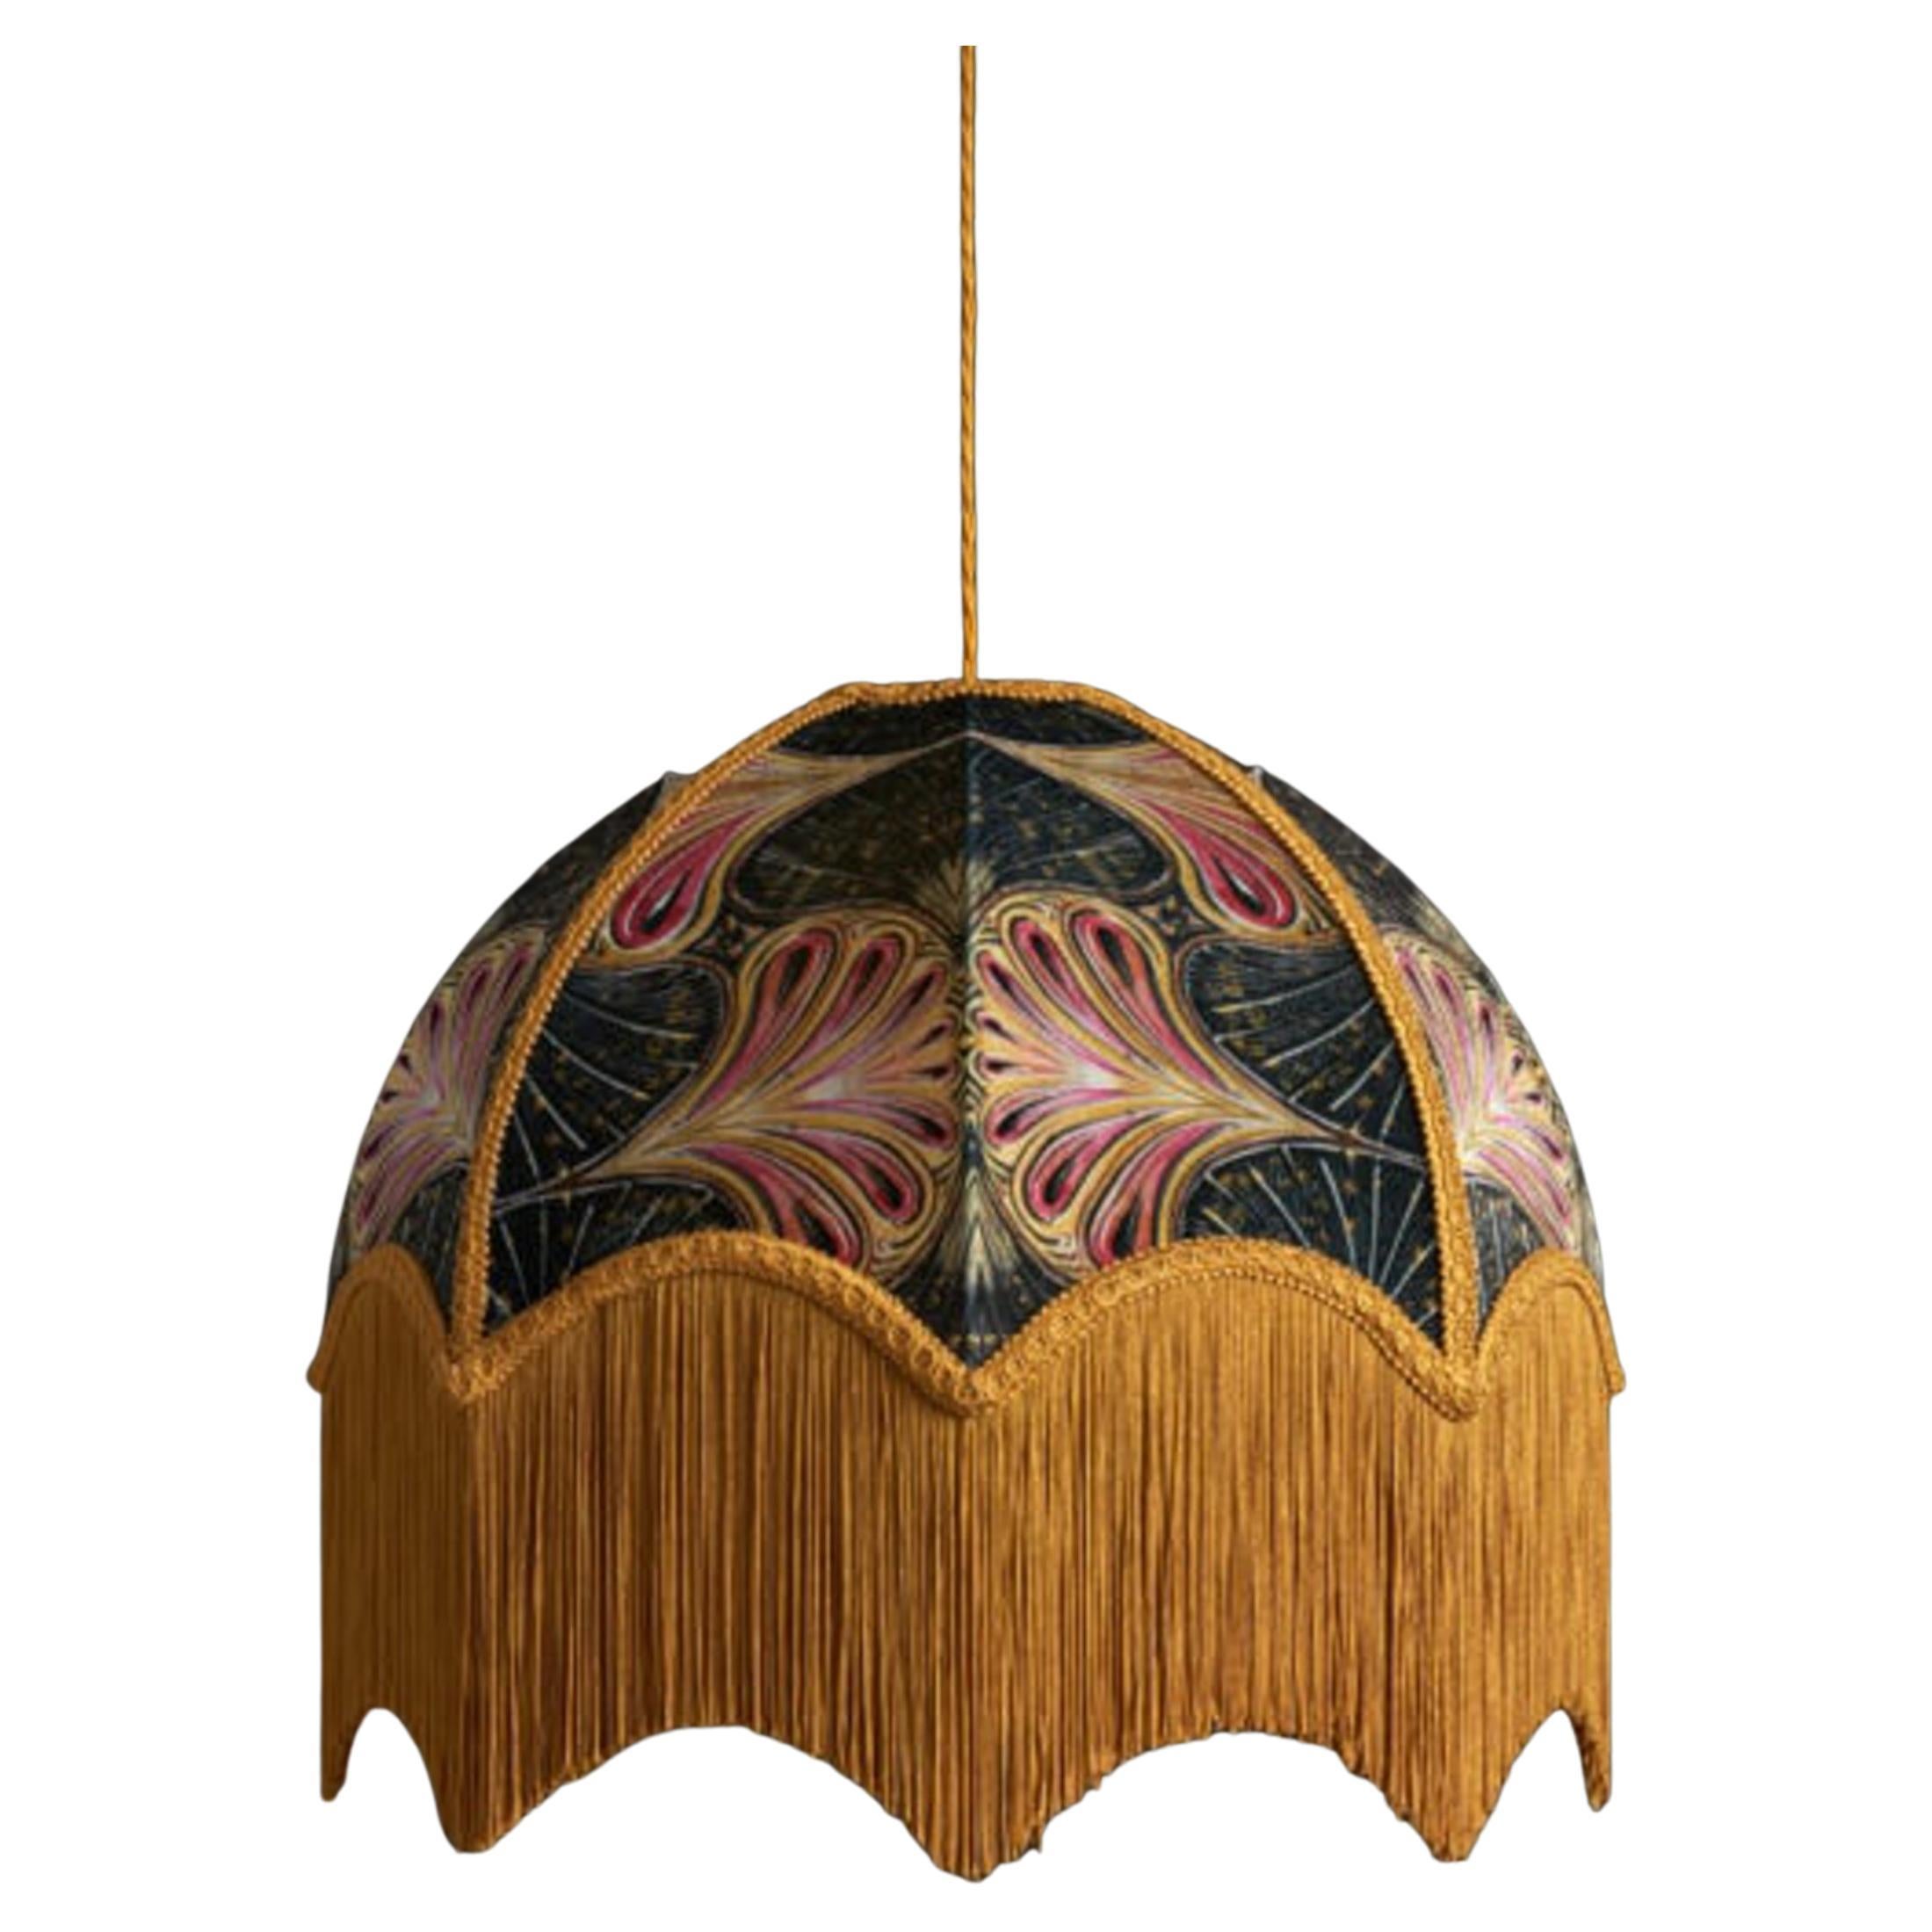 Showgirl Lampshade with Fringing - Extra Large (22") For Sale